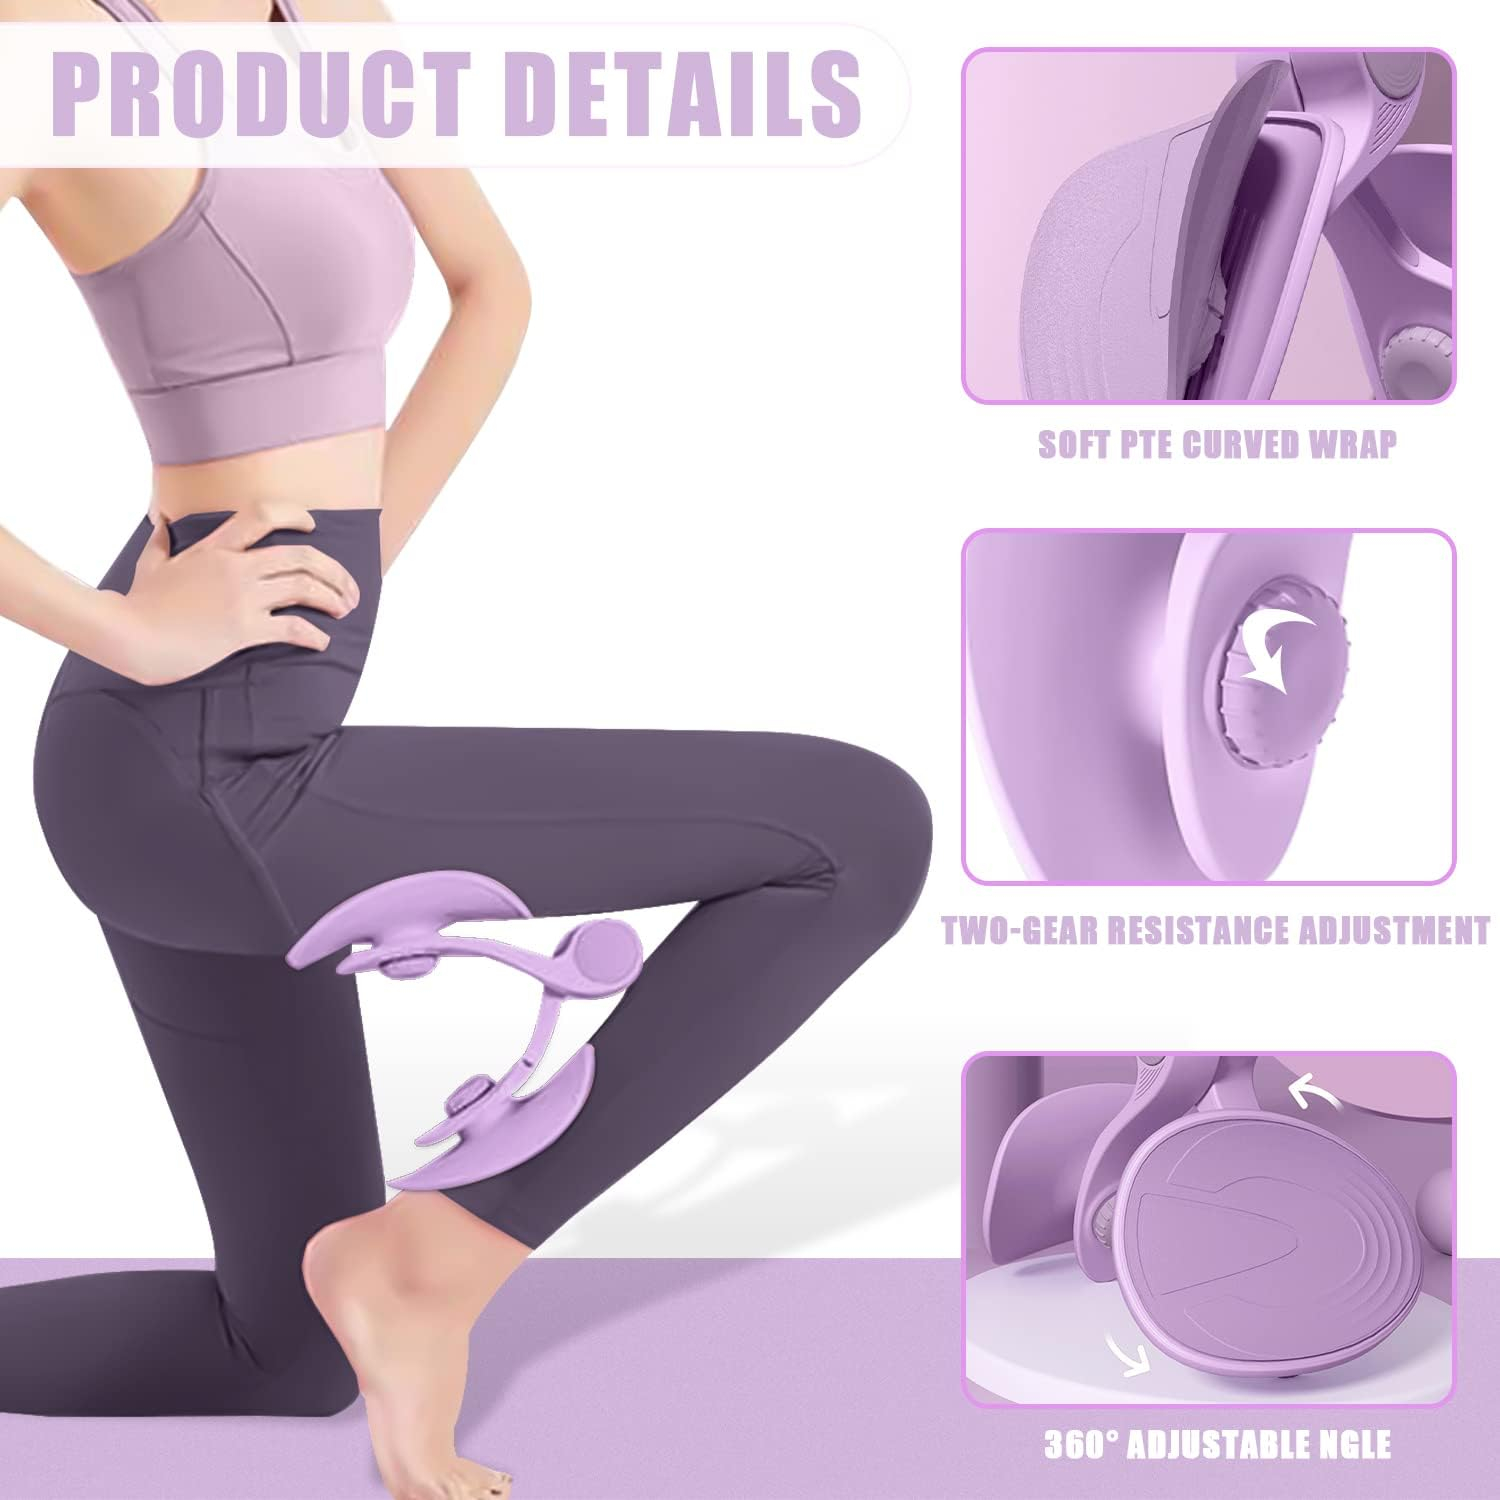 Kmise Thigh Master Thigh Exerciser,Pelvic Floor Muscle Trainer,Kegel Trainer for Postpartum Rehabilitation, Arm/Leg/Hip/Inner Thigh Exercise Workout Equipment for Women Come with 8-Shaped Tension Band